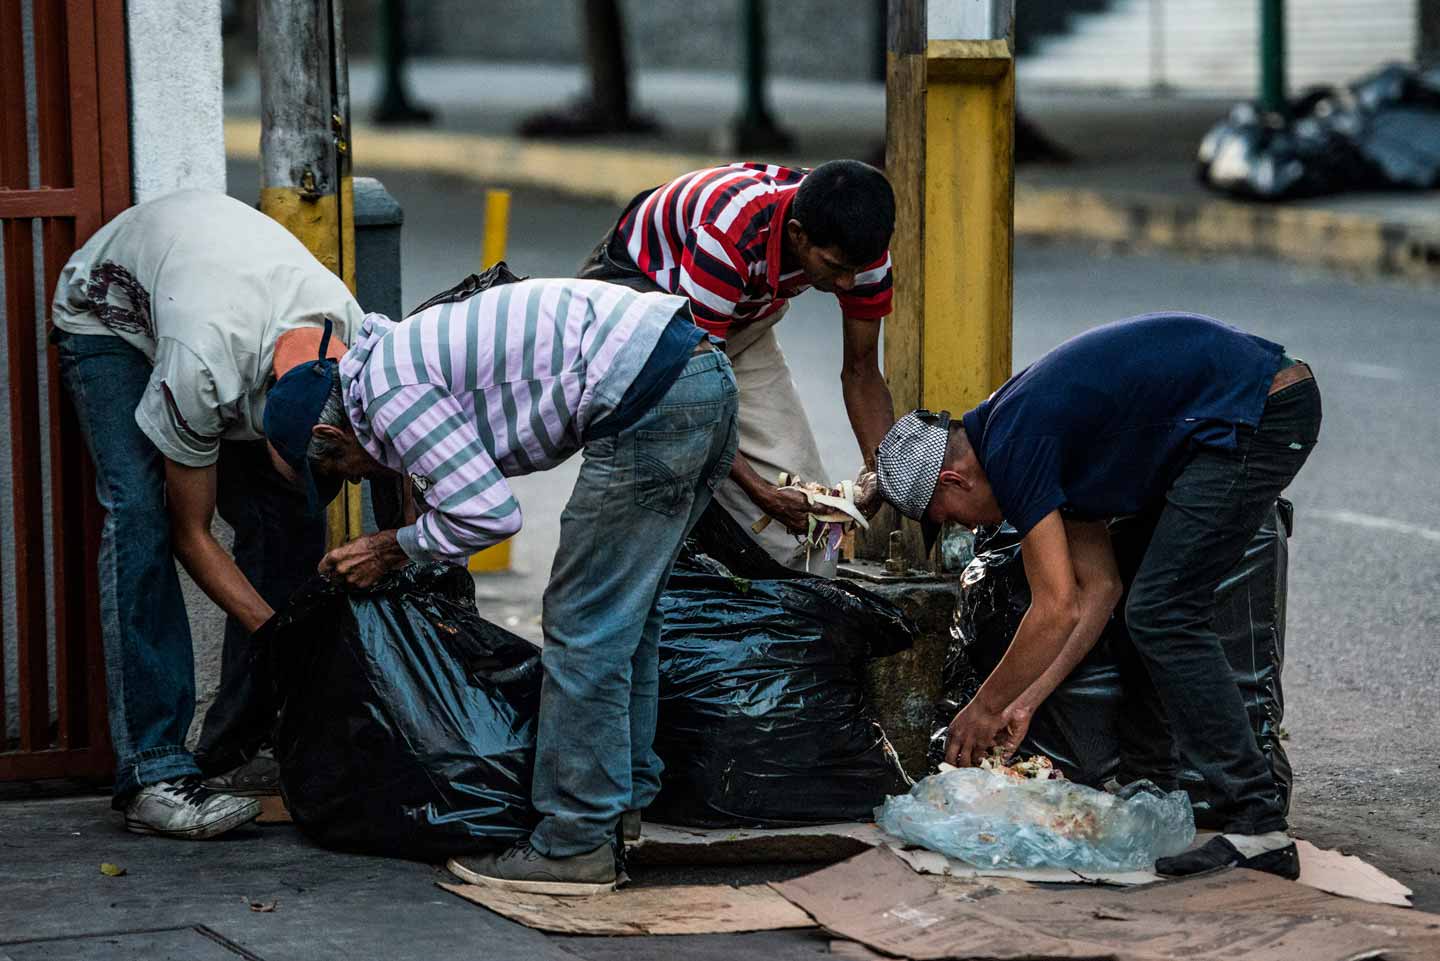 © Federico Parra. People scavenge for food in the streets of Caracas on February 22, 2017. Venezuelan The opposition blames Nicolas Maduro for an economic crisis that has caused food shortages.